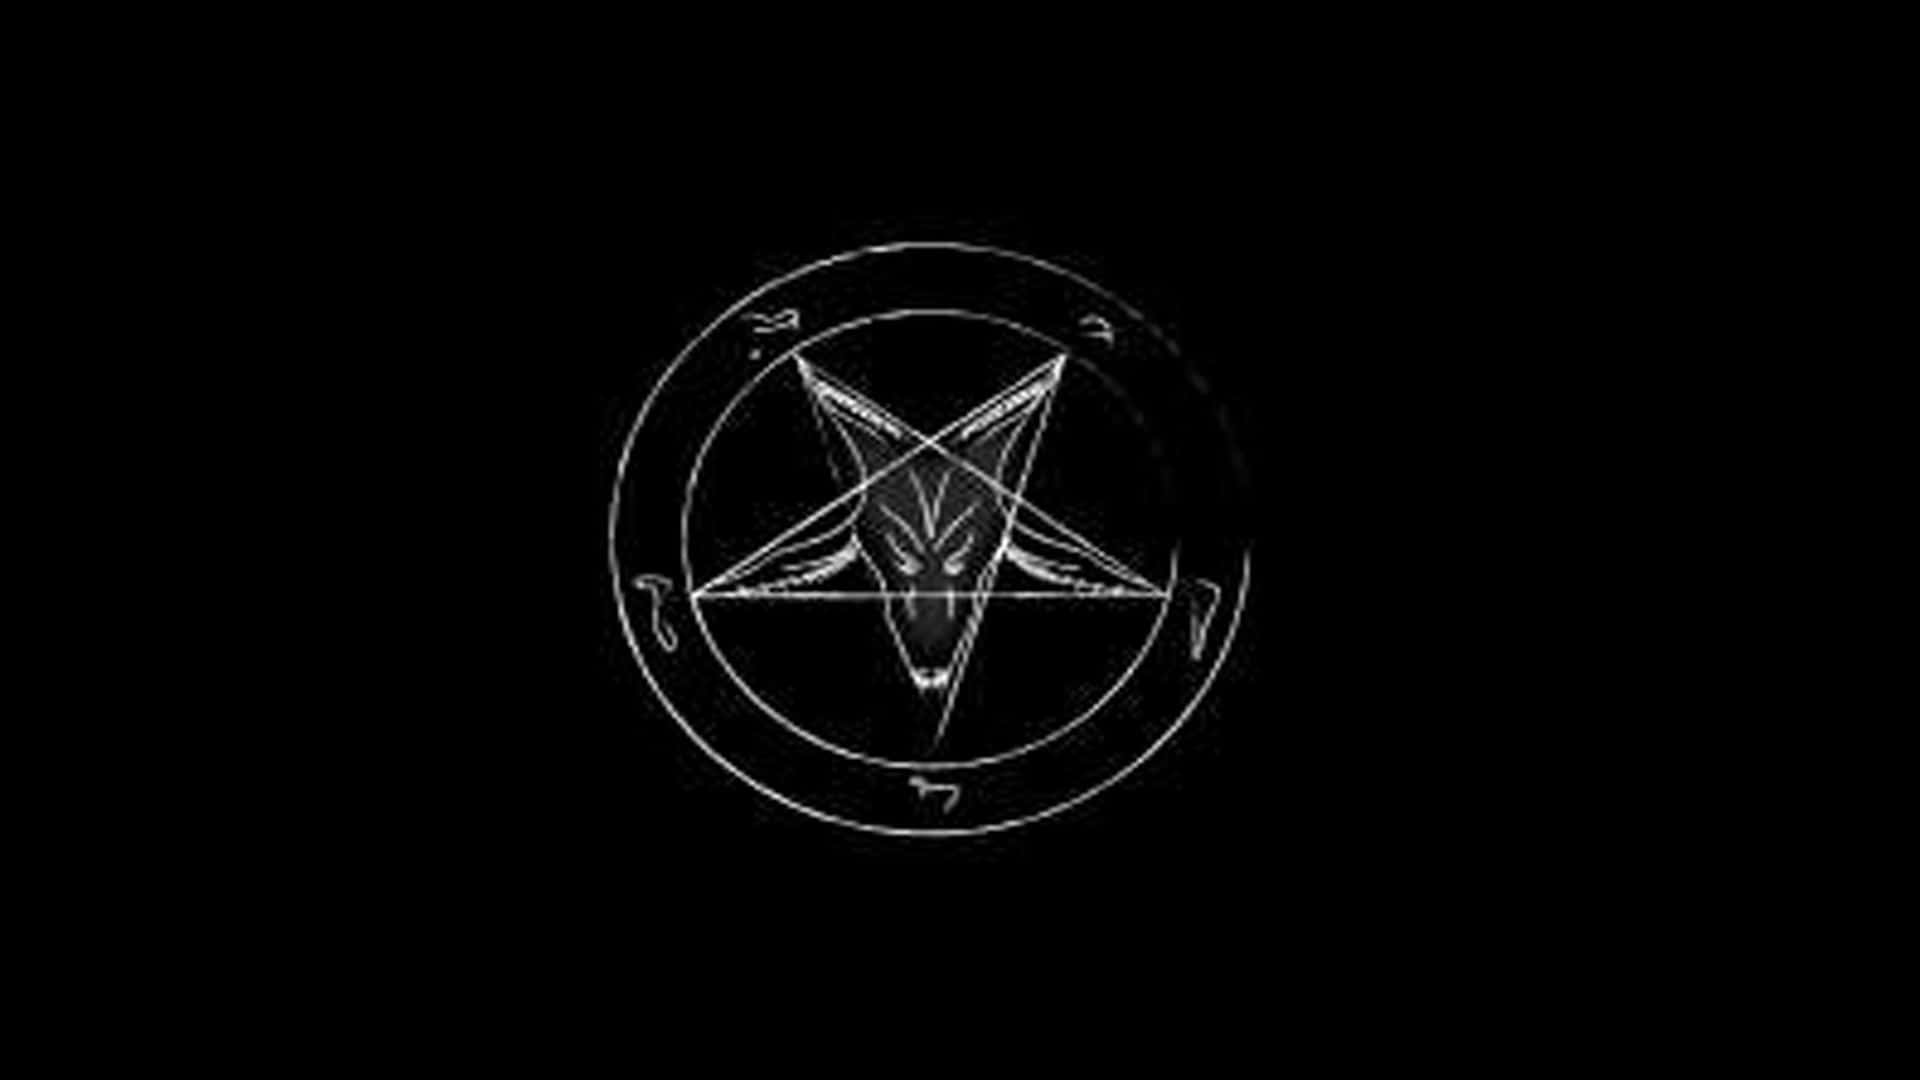 [100+] Occult Wallpapers | Wallpapers.com